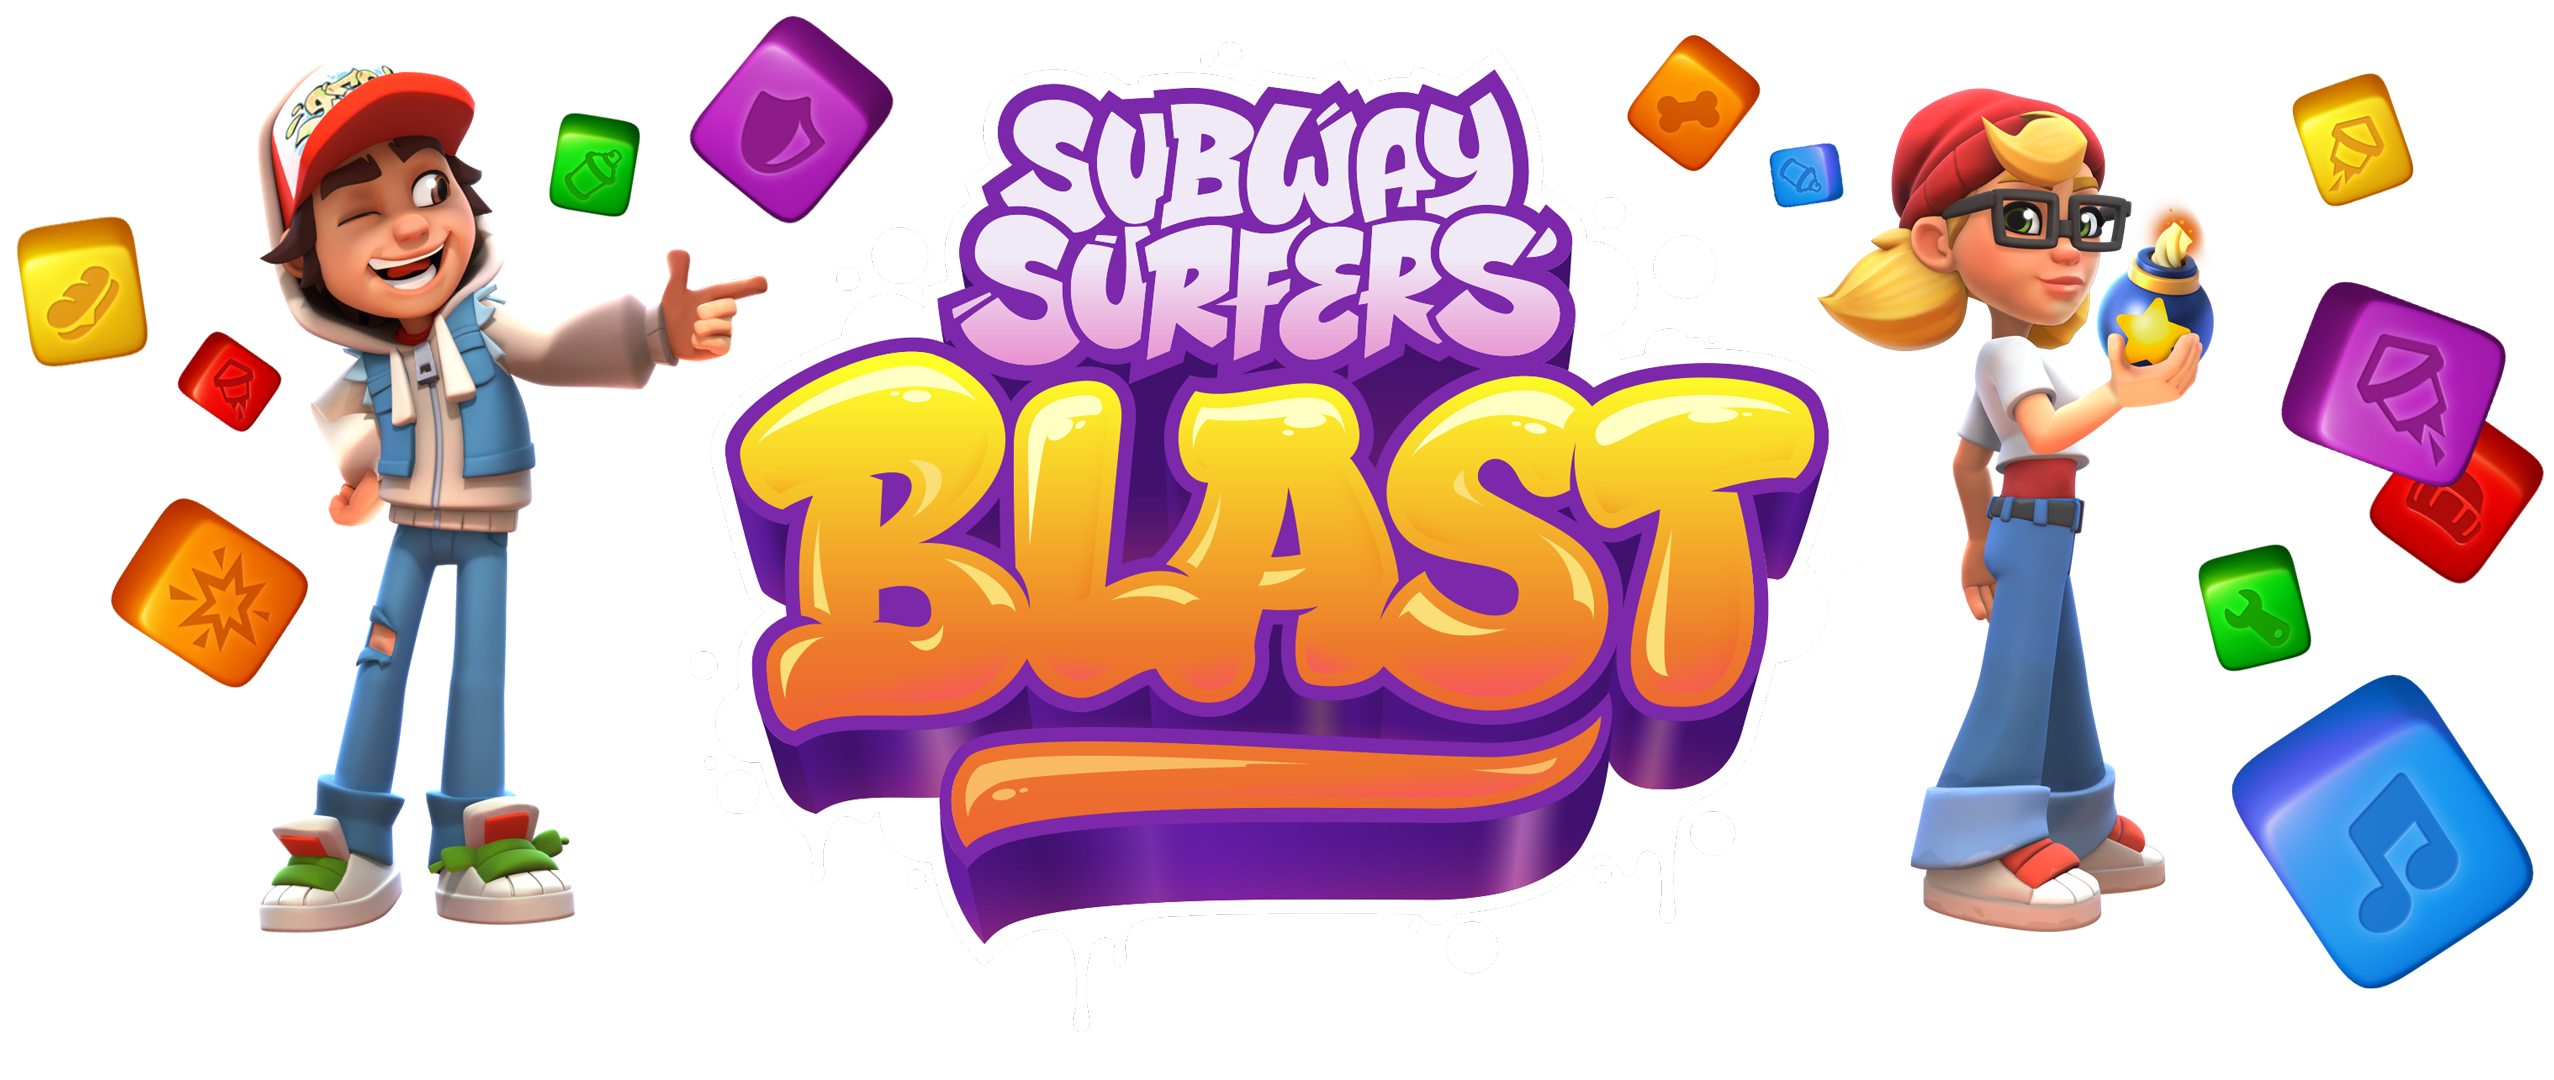 Subway Surfers: .co.uk: Appstore for Android  Subway surfers, Subway  surfers game, Subway surfers new york